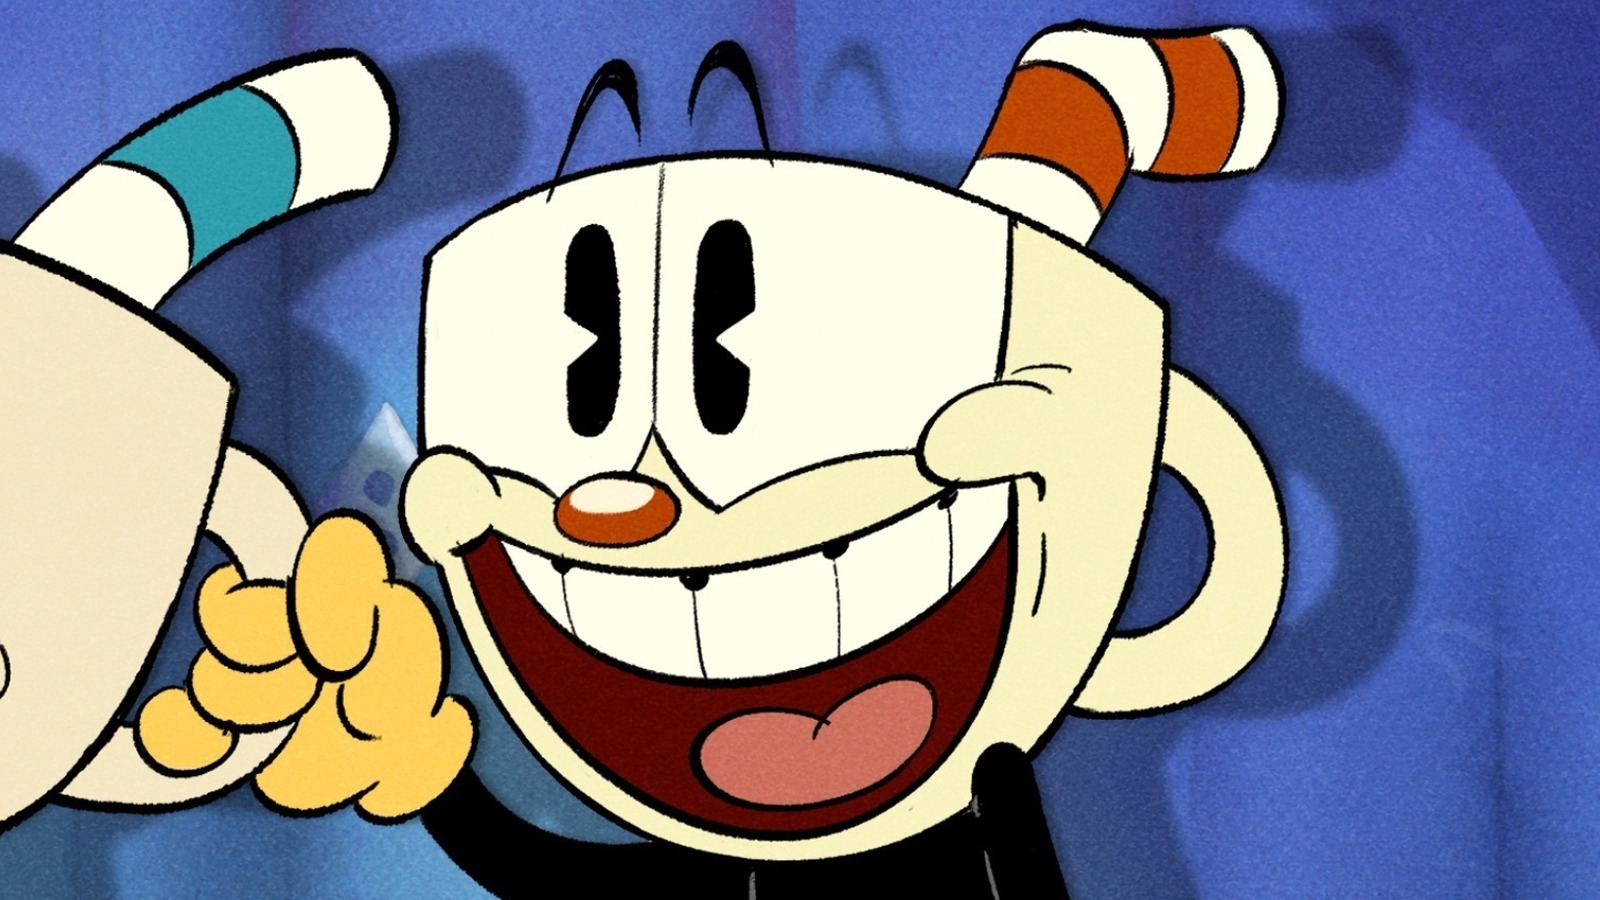 Here's our first look at The Cuphead Show on Netflix